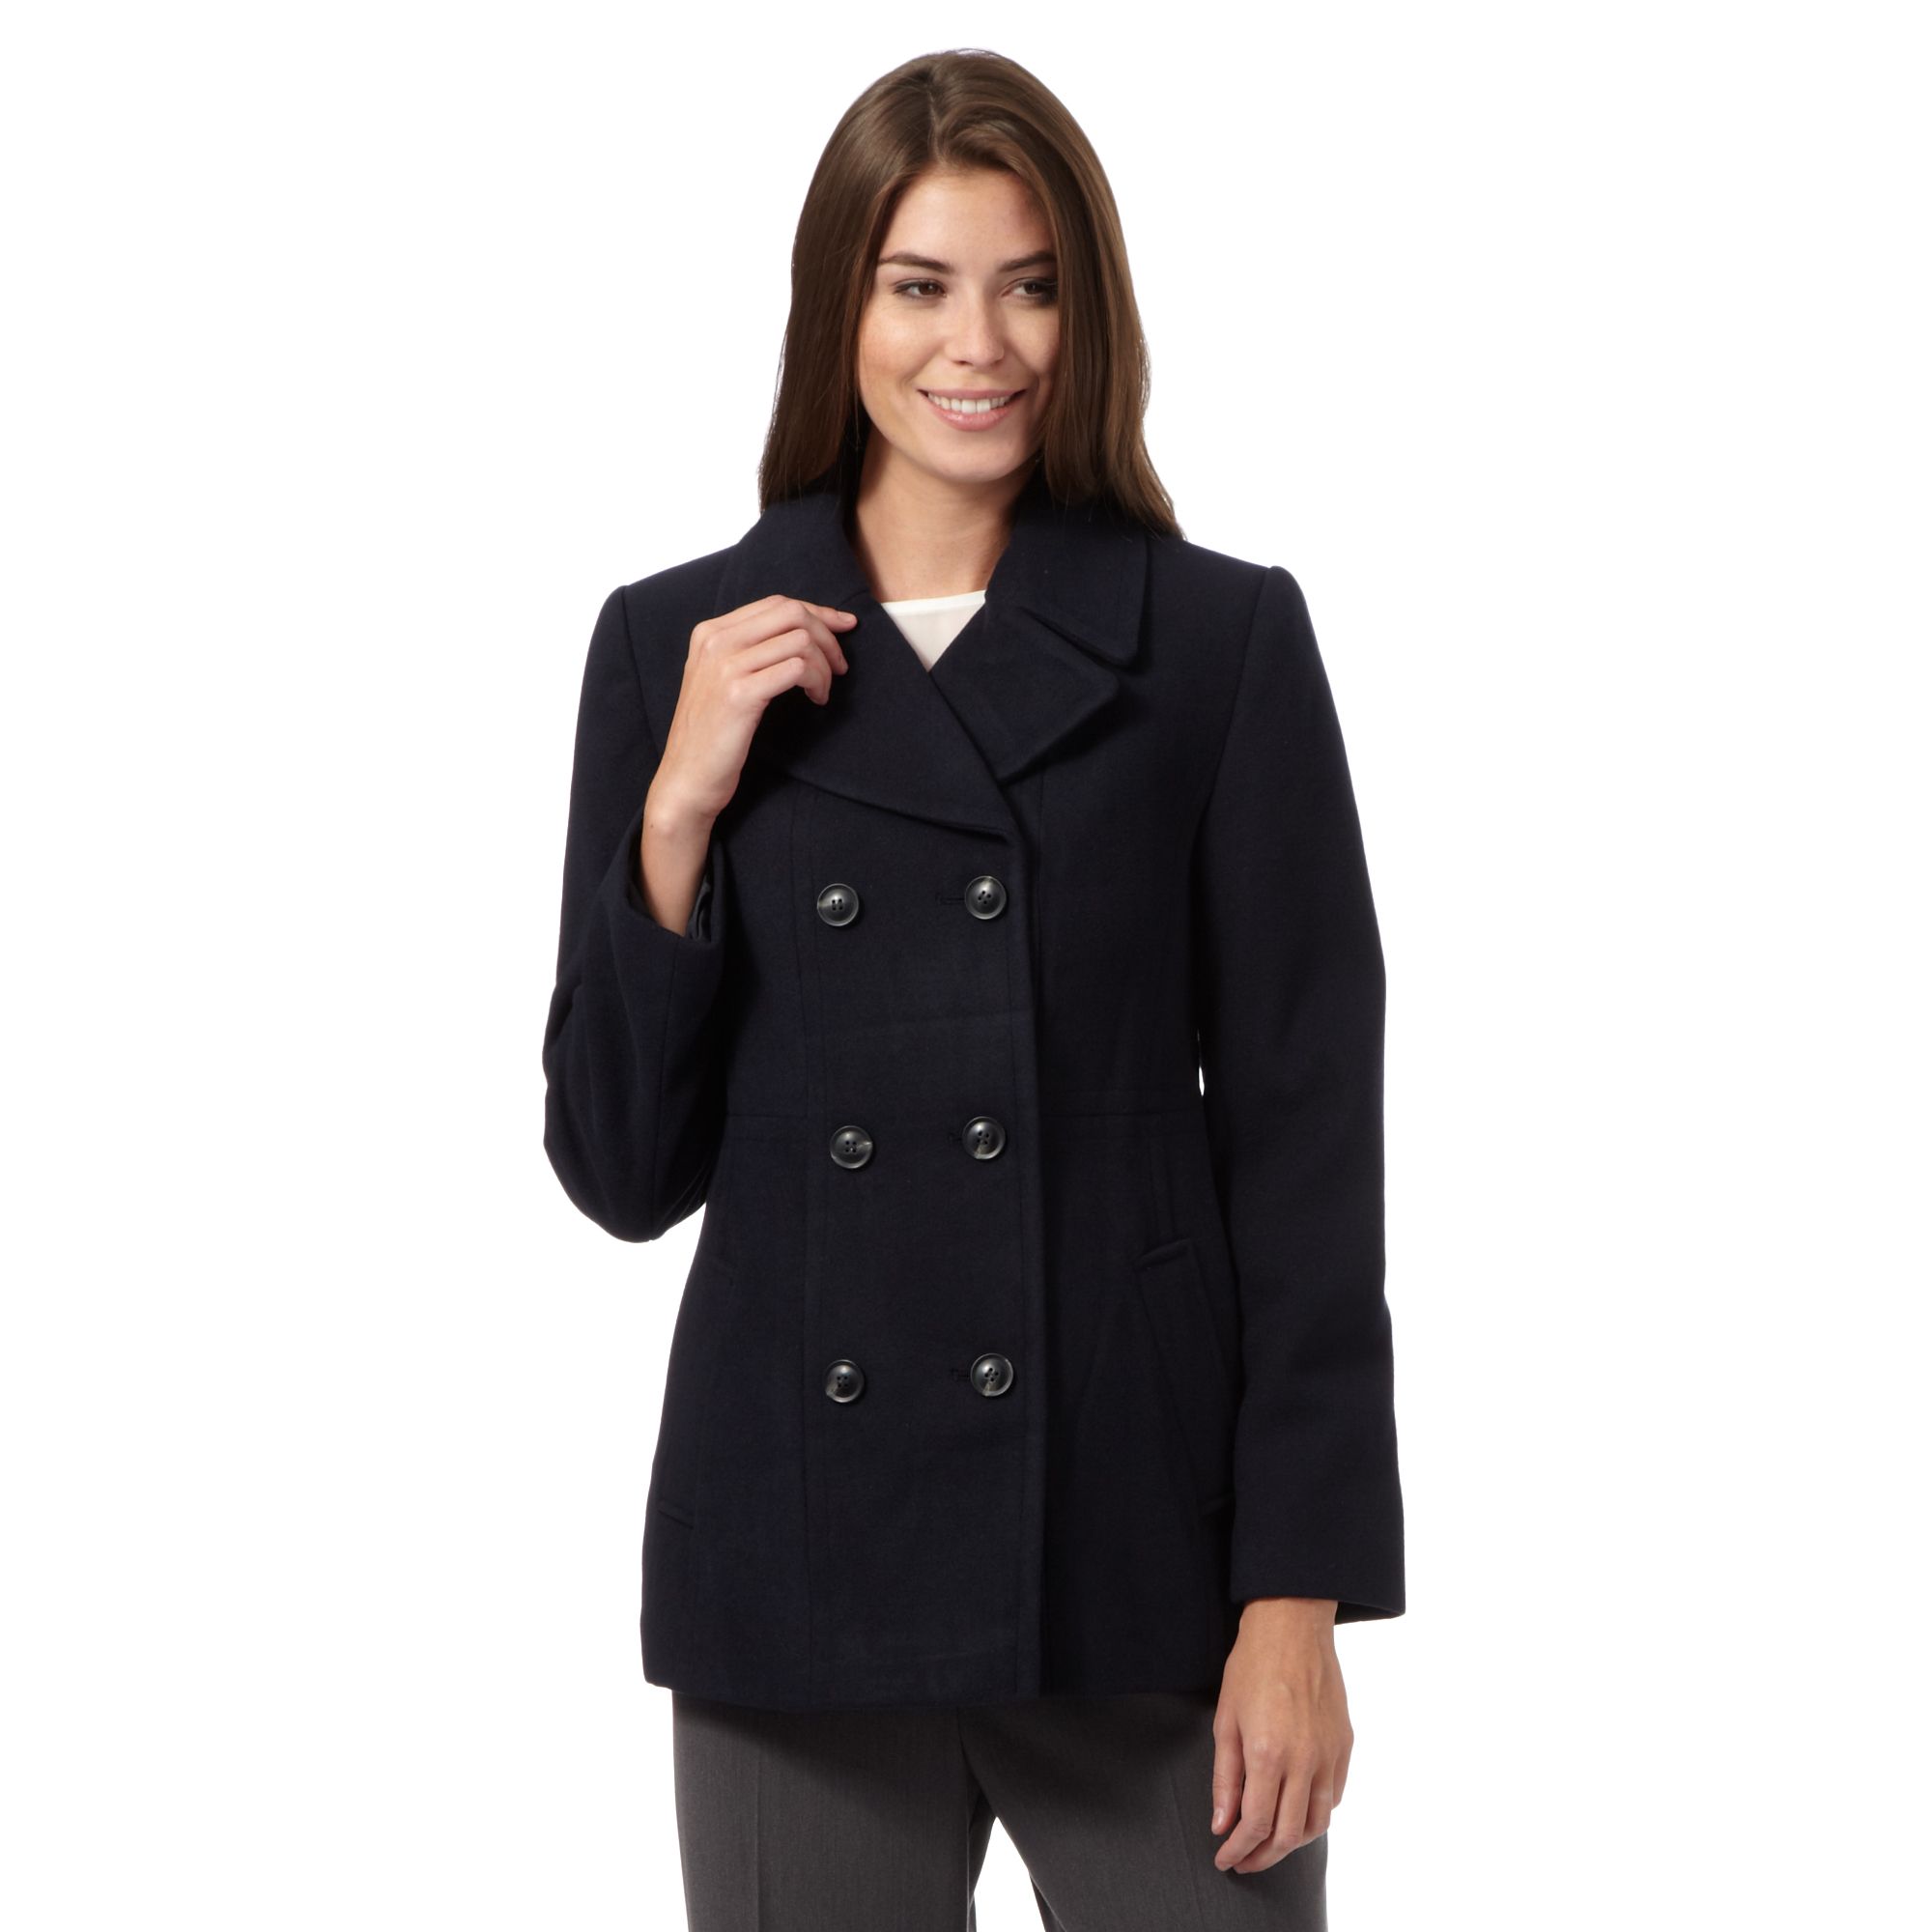 The Collection Womens Navy Reefer Jacket From Debenhams | eBay